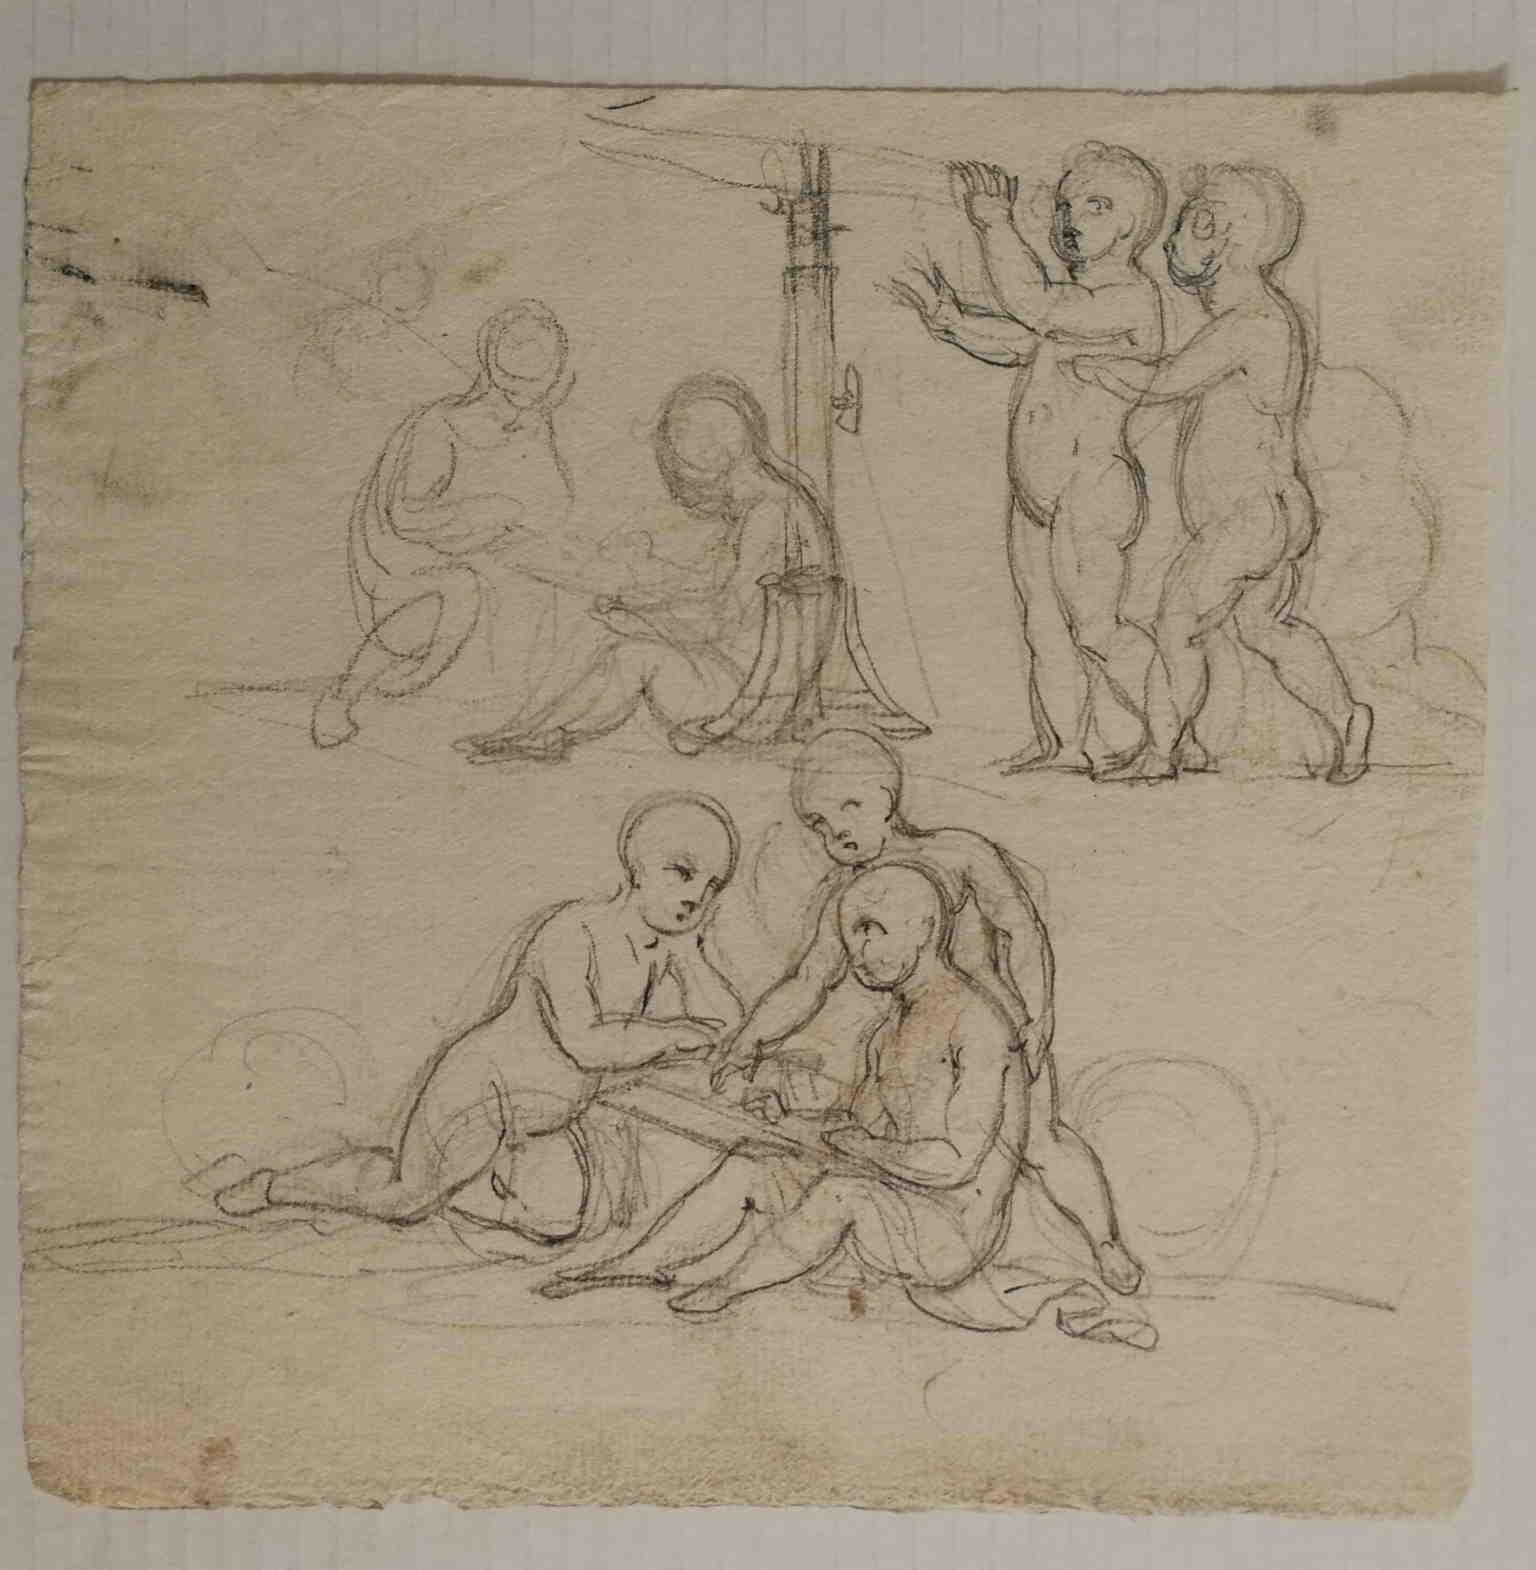 Unknown Figurative Art - Tuscan Mythological Allegory Drawing 19 century pencil paper